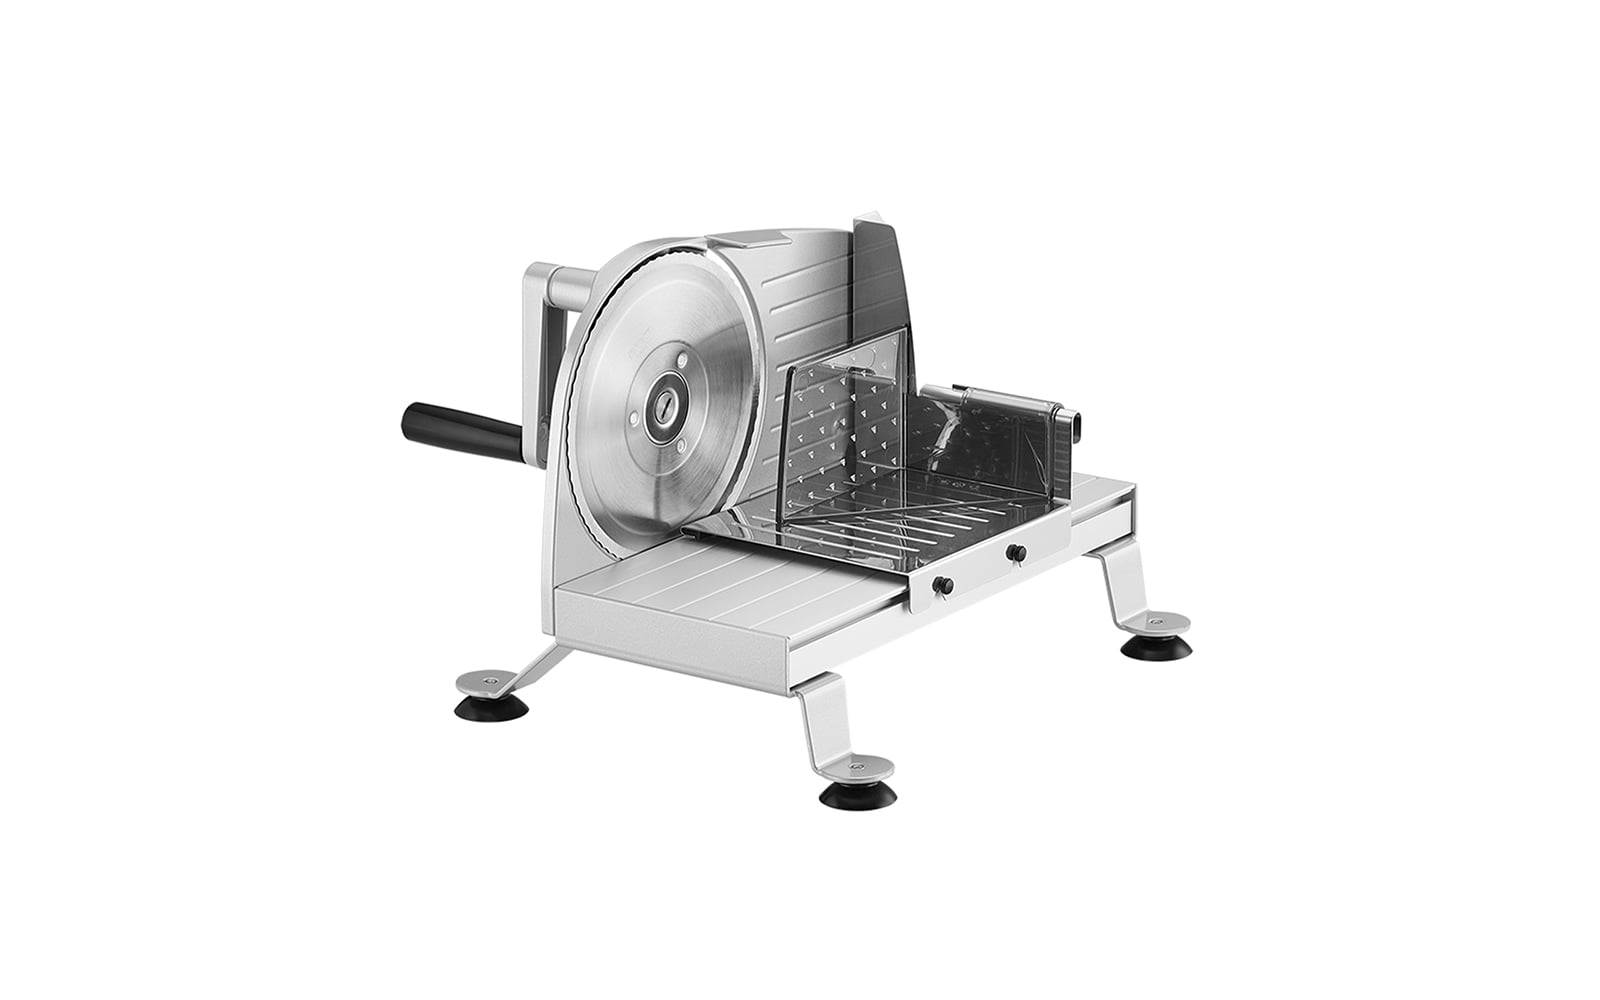 Maximex 7519500 Bread Slicer with Hand Crank, Rustproof Stainless